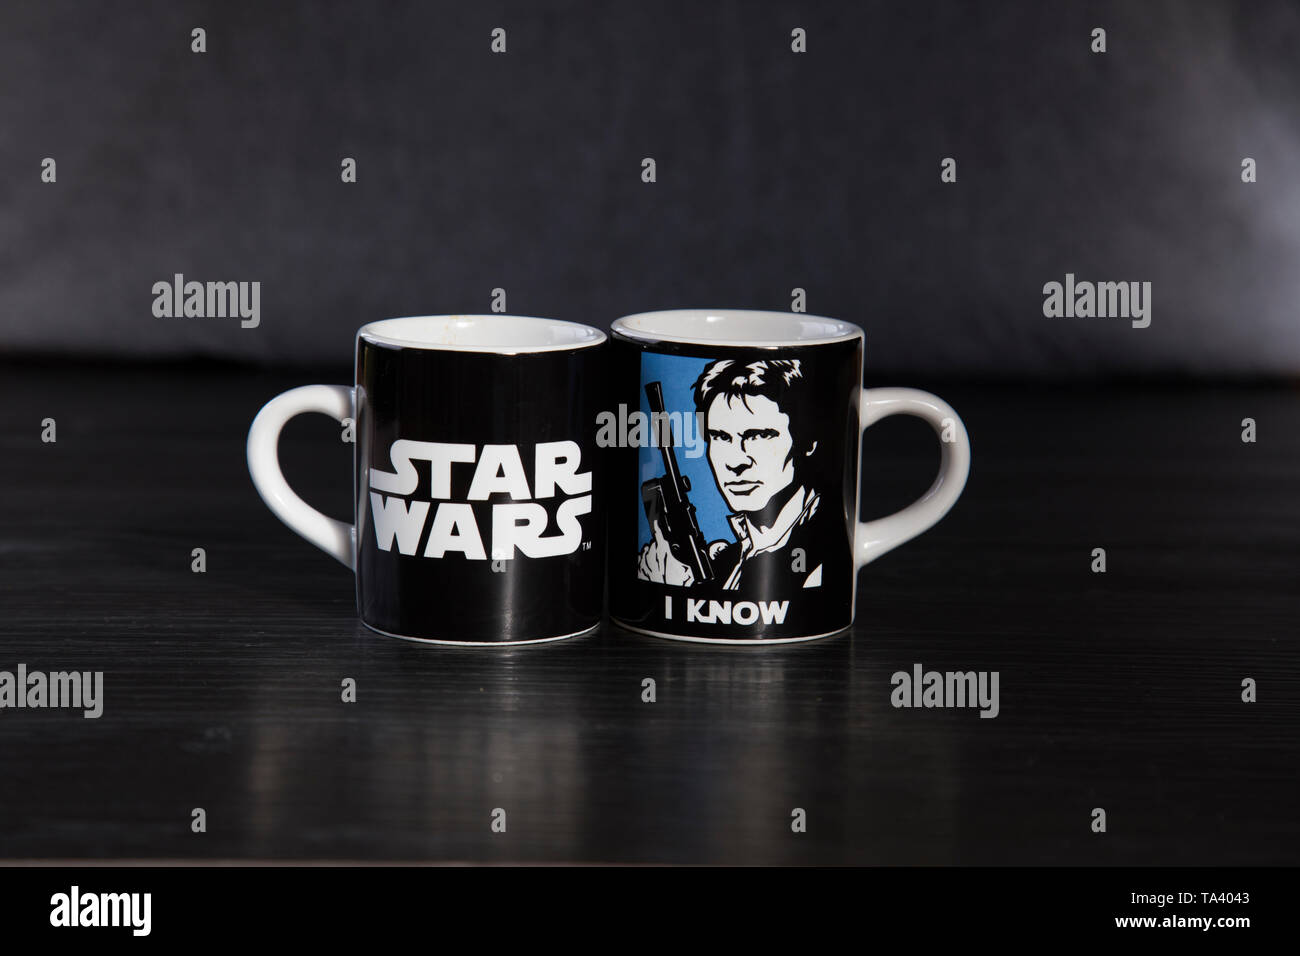 https://c8.alamy.com/comp/TA4043/two-star-wars-branded-espresso-cups-one-with-princess-leia-saying-i-love-you-and-the-other-with-han-solo-saying-i-know-on-wooden-bench-top-TA4043.jpg